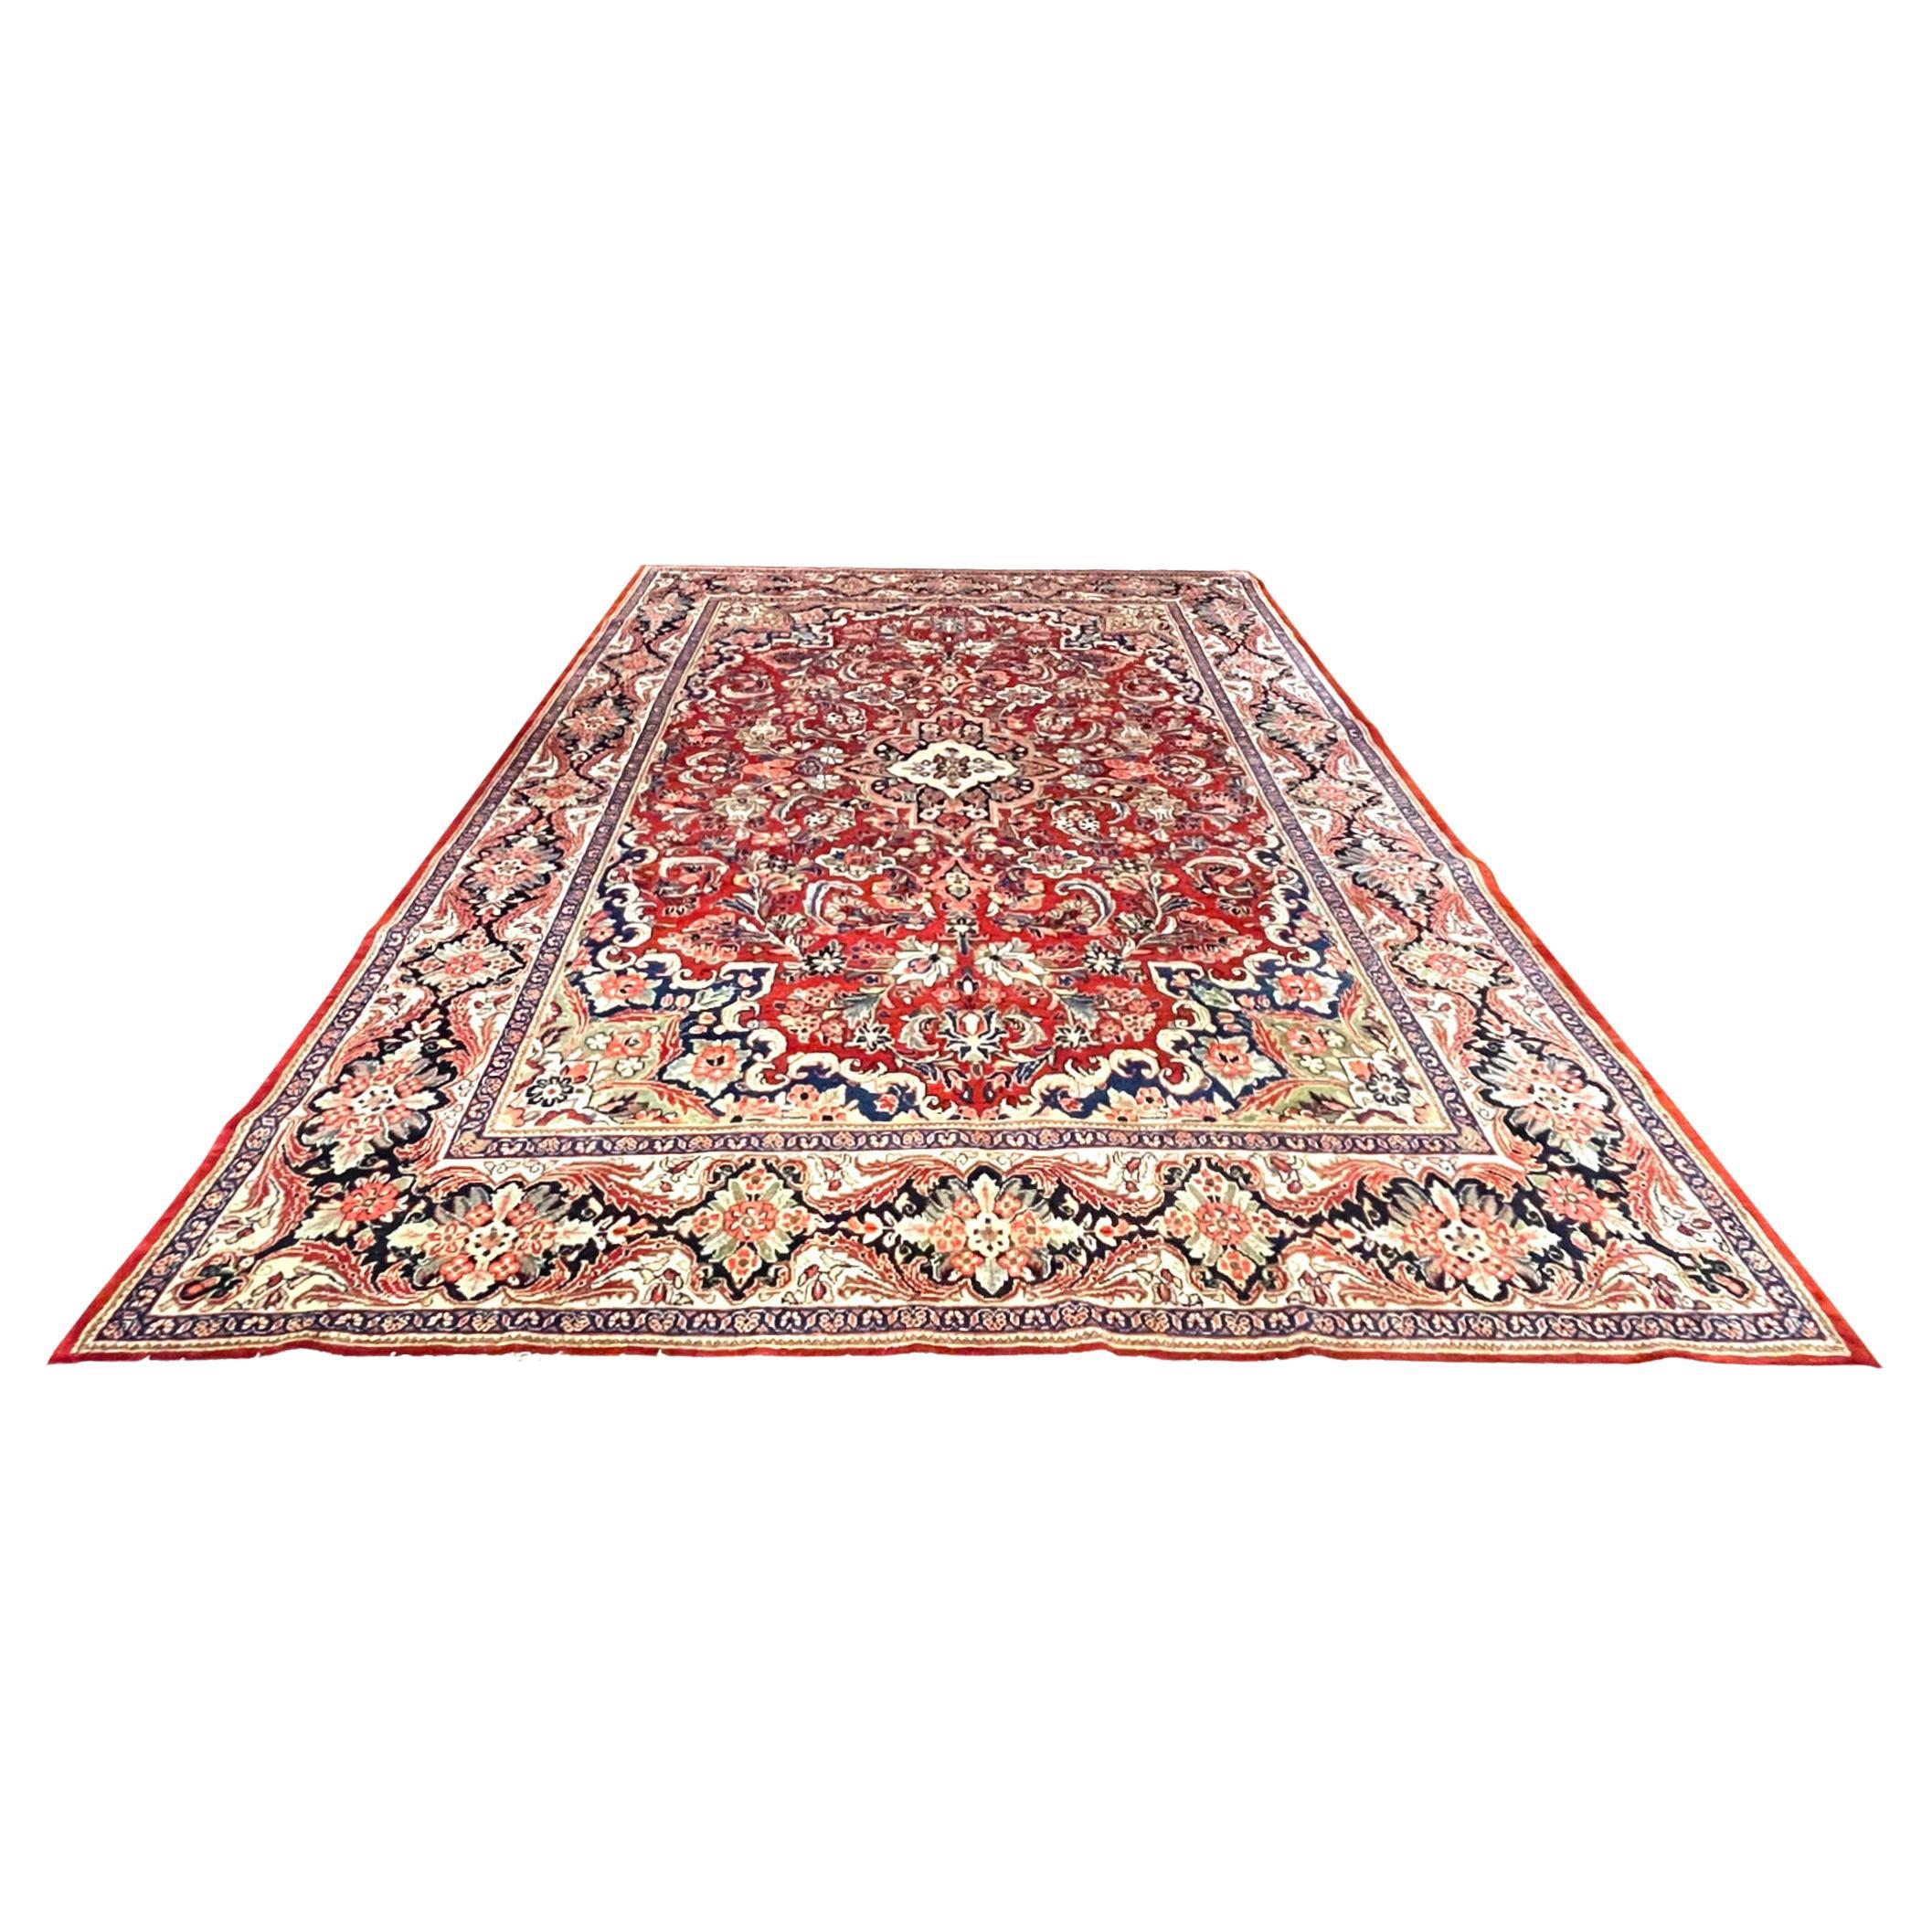 Authentic Persian Hand Knotted Red Floral Sarouk Mahal Rug, circa 1960 For Sale